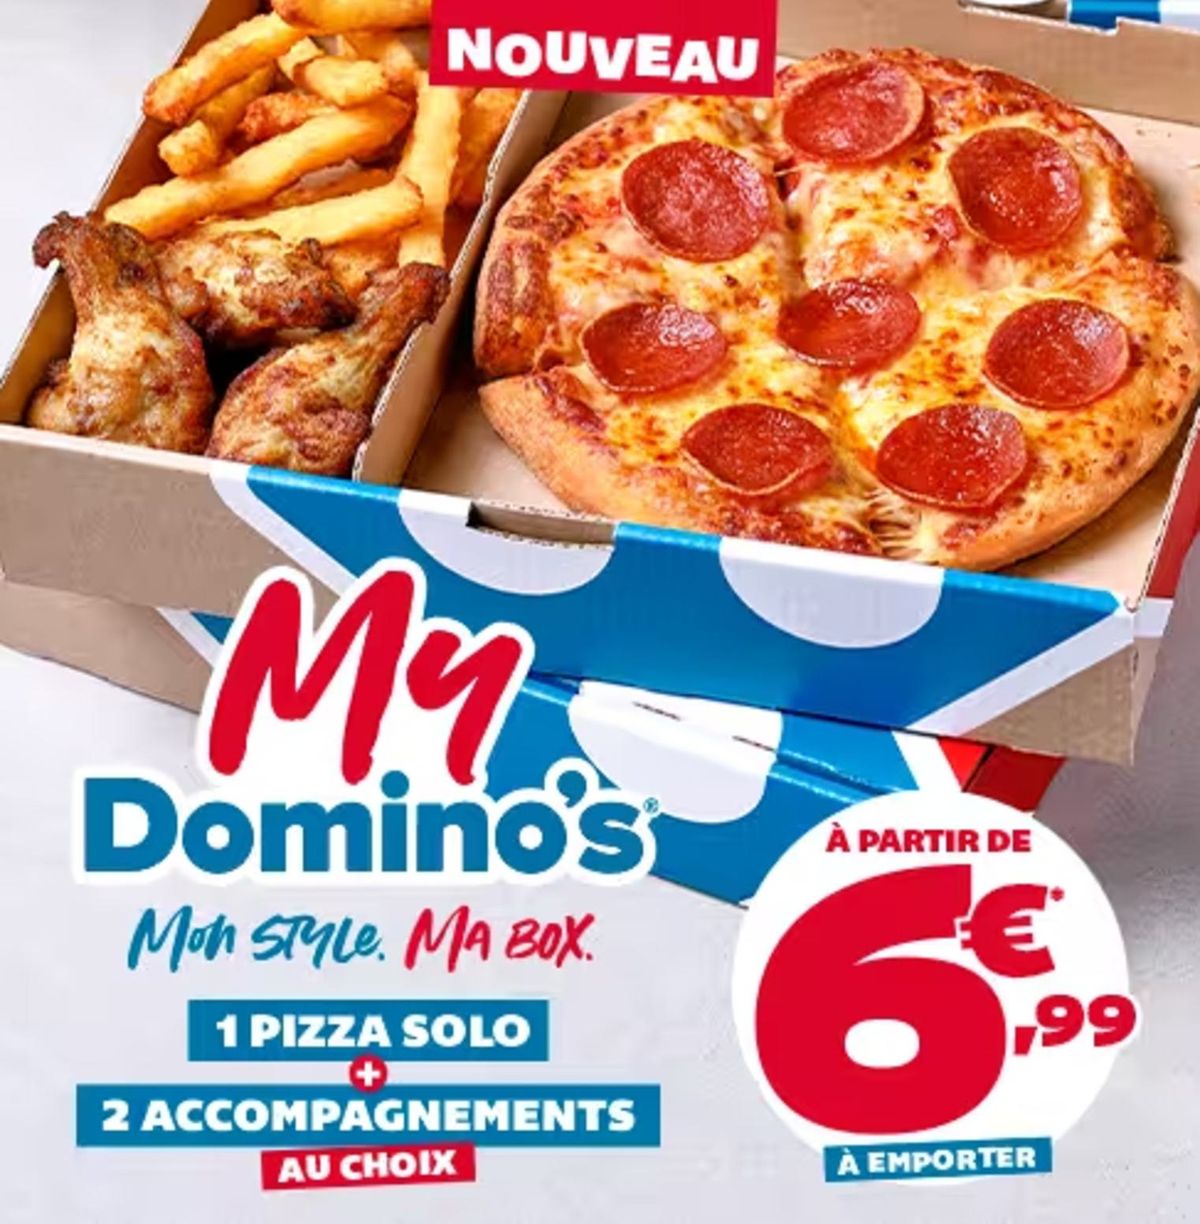 Catalogue Offres Domino’s Pizza, page 00001